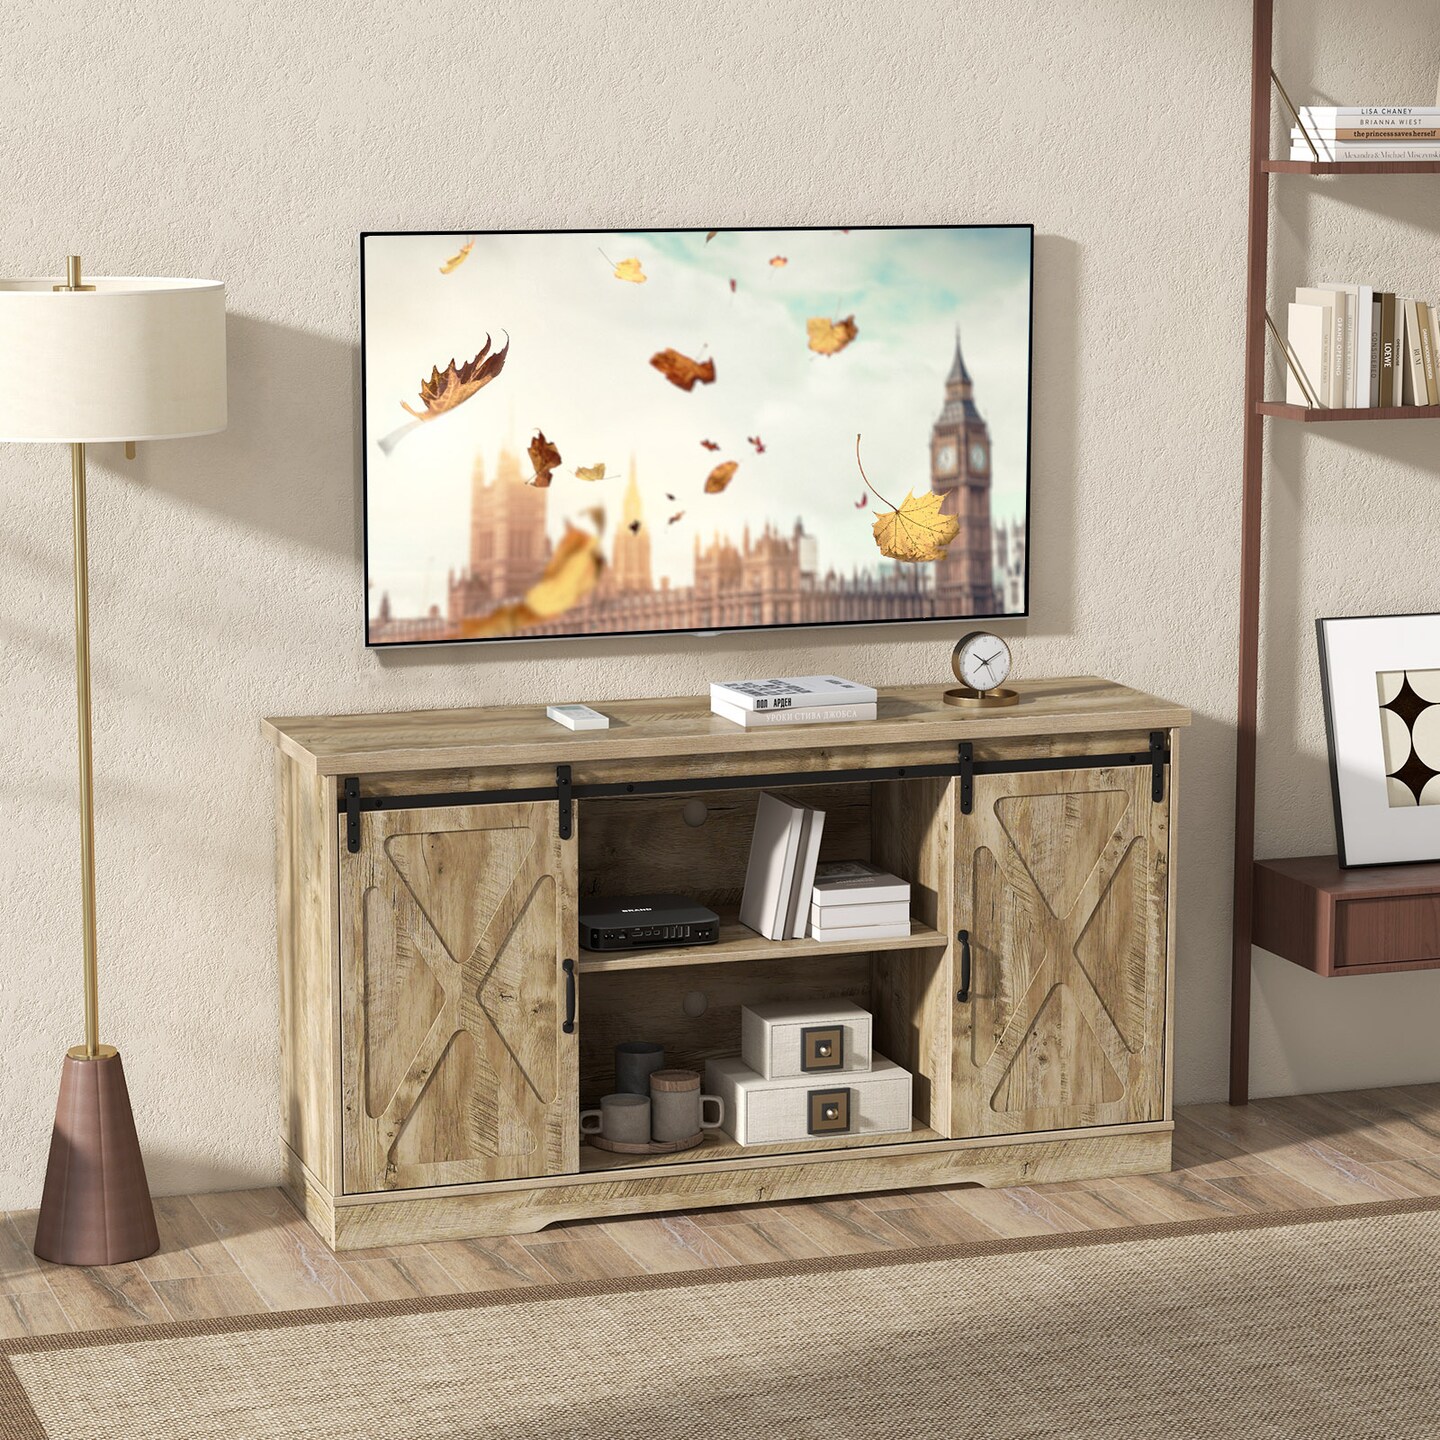 Farmhouse Tv Stand Entertainment Center With Adjustable Shelves And Storage Cabinet